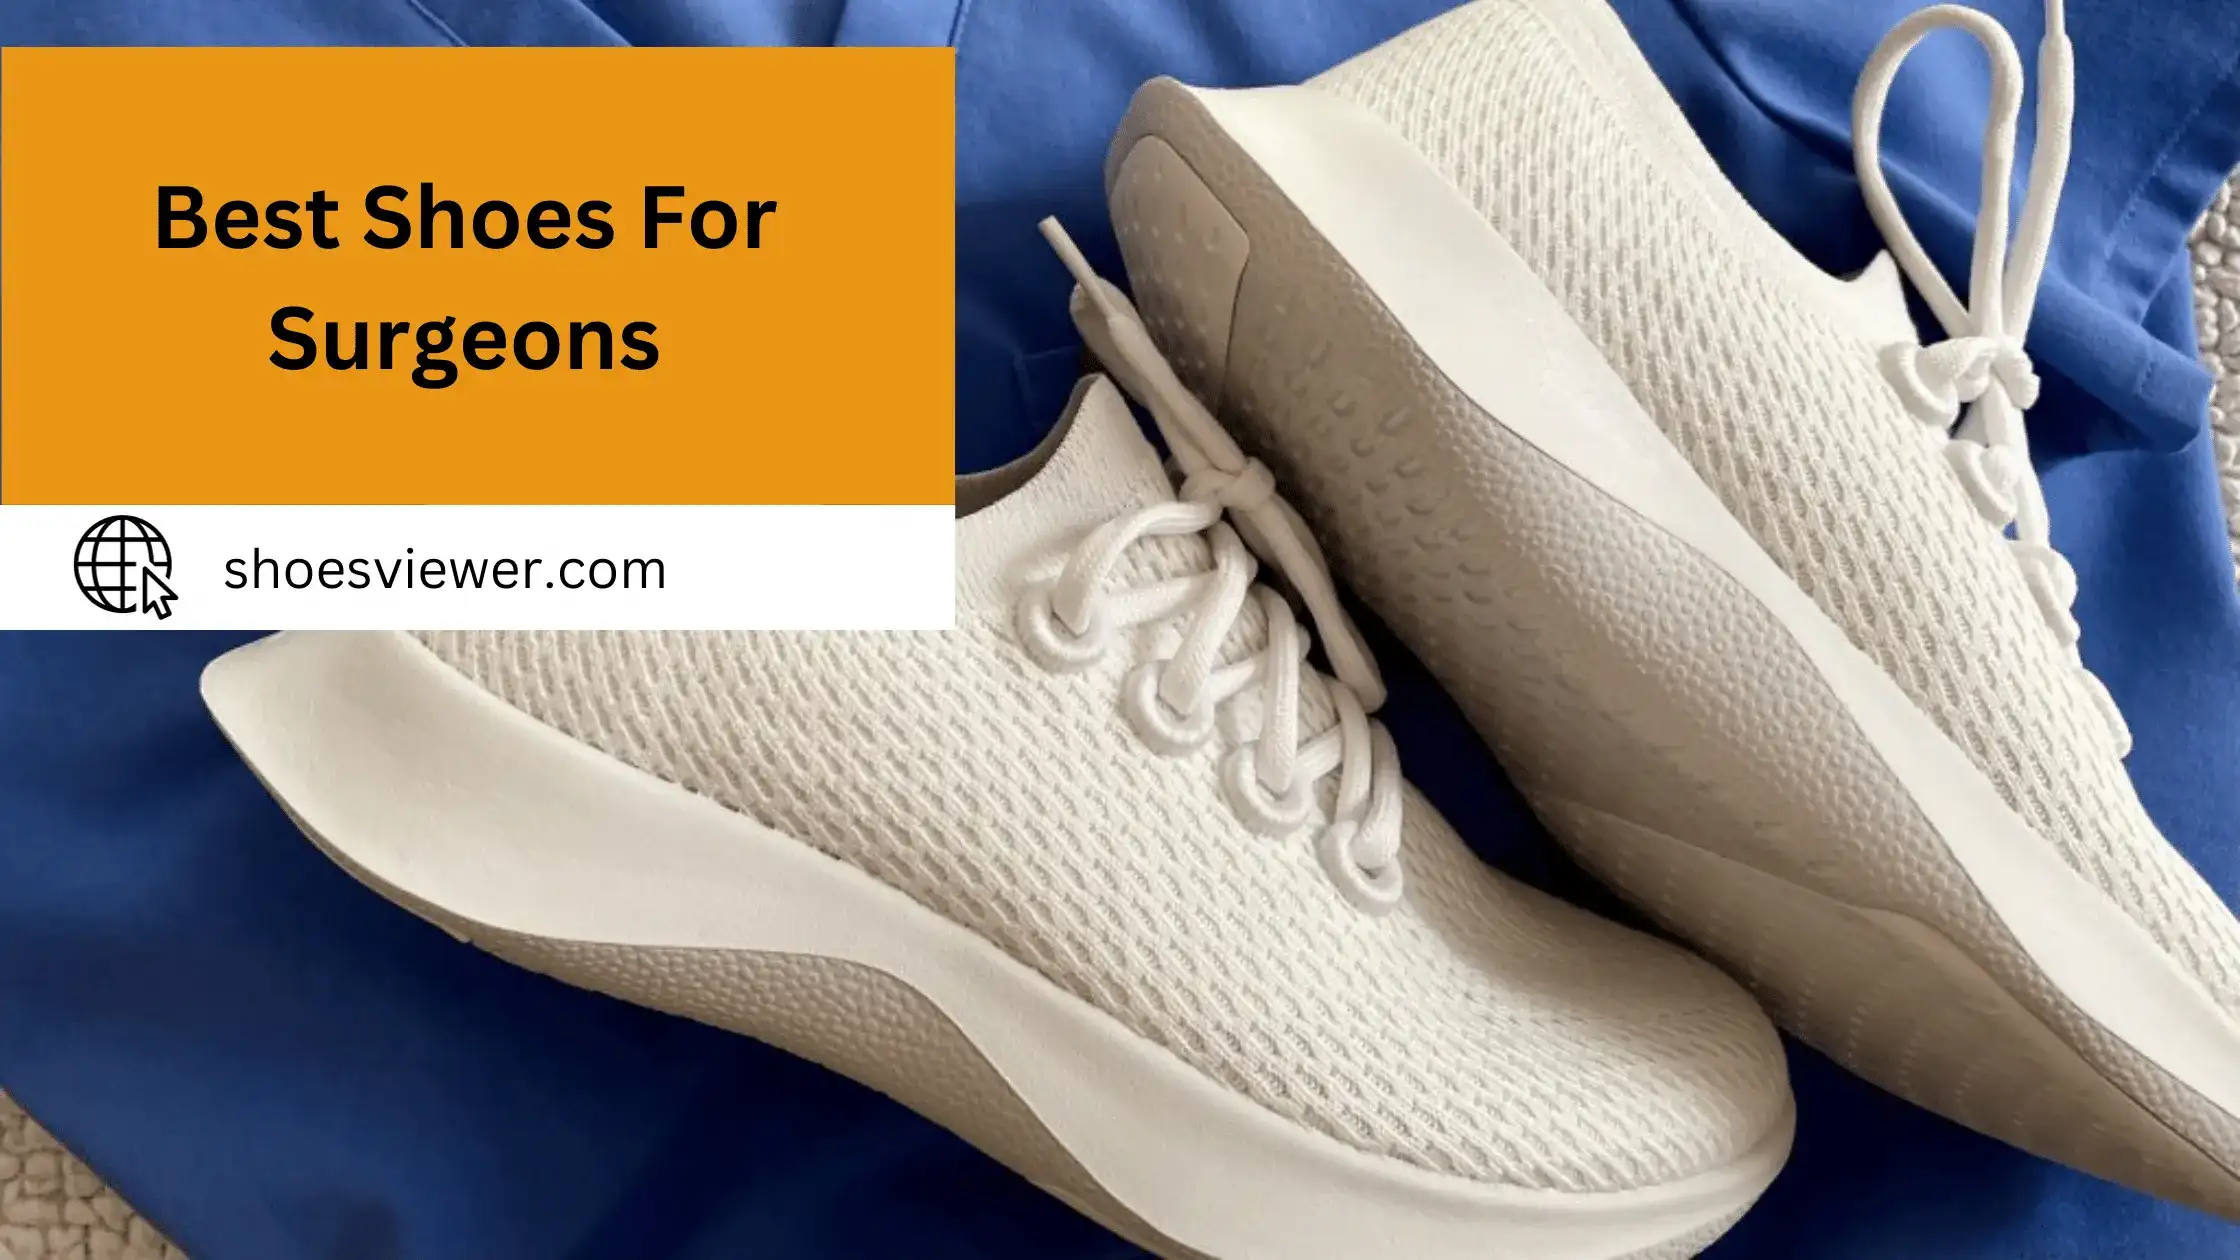 Best Shoes For Surgeons - A Comprehensive Guide